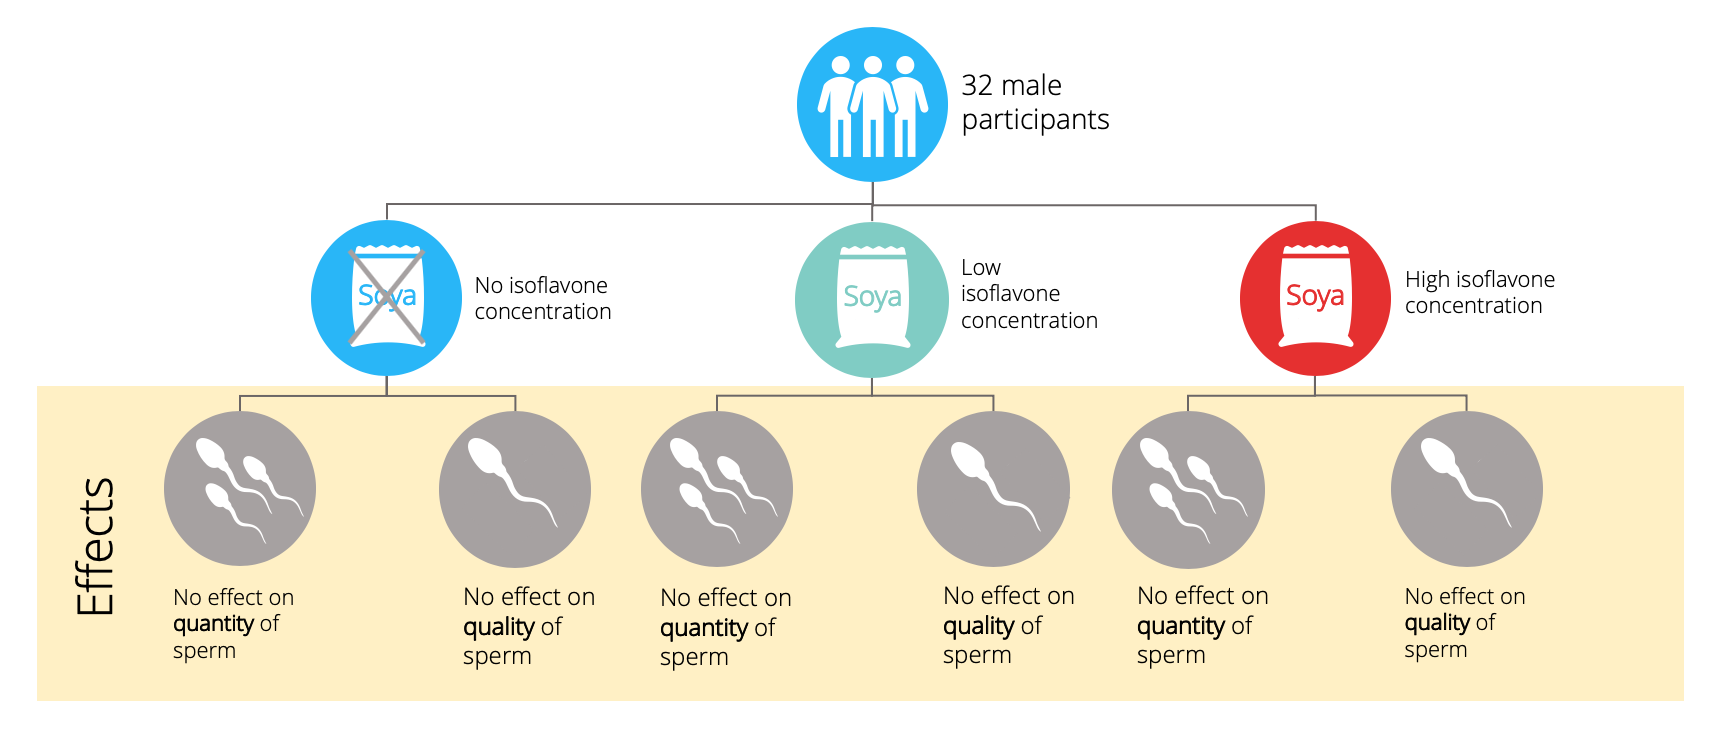 Illustration of the clinical trial that shows no effect of isoflavone supplementation on sperm quantity and quality.